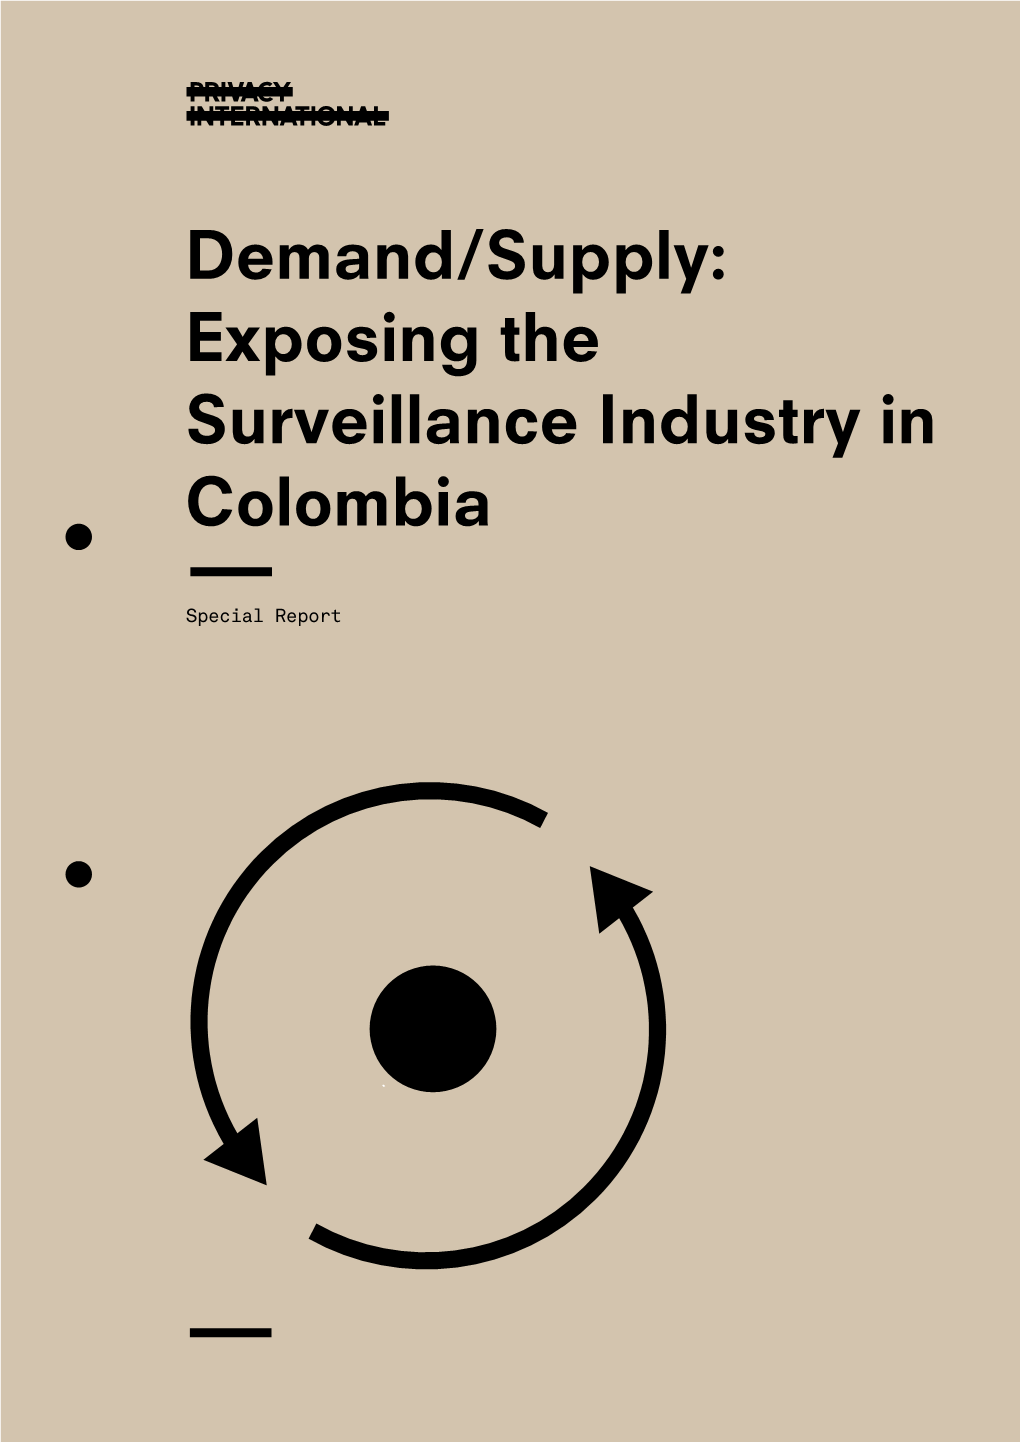 Demand/Supply: Exposing the Surveillance Industry in Colombia